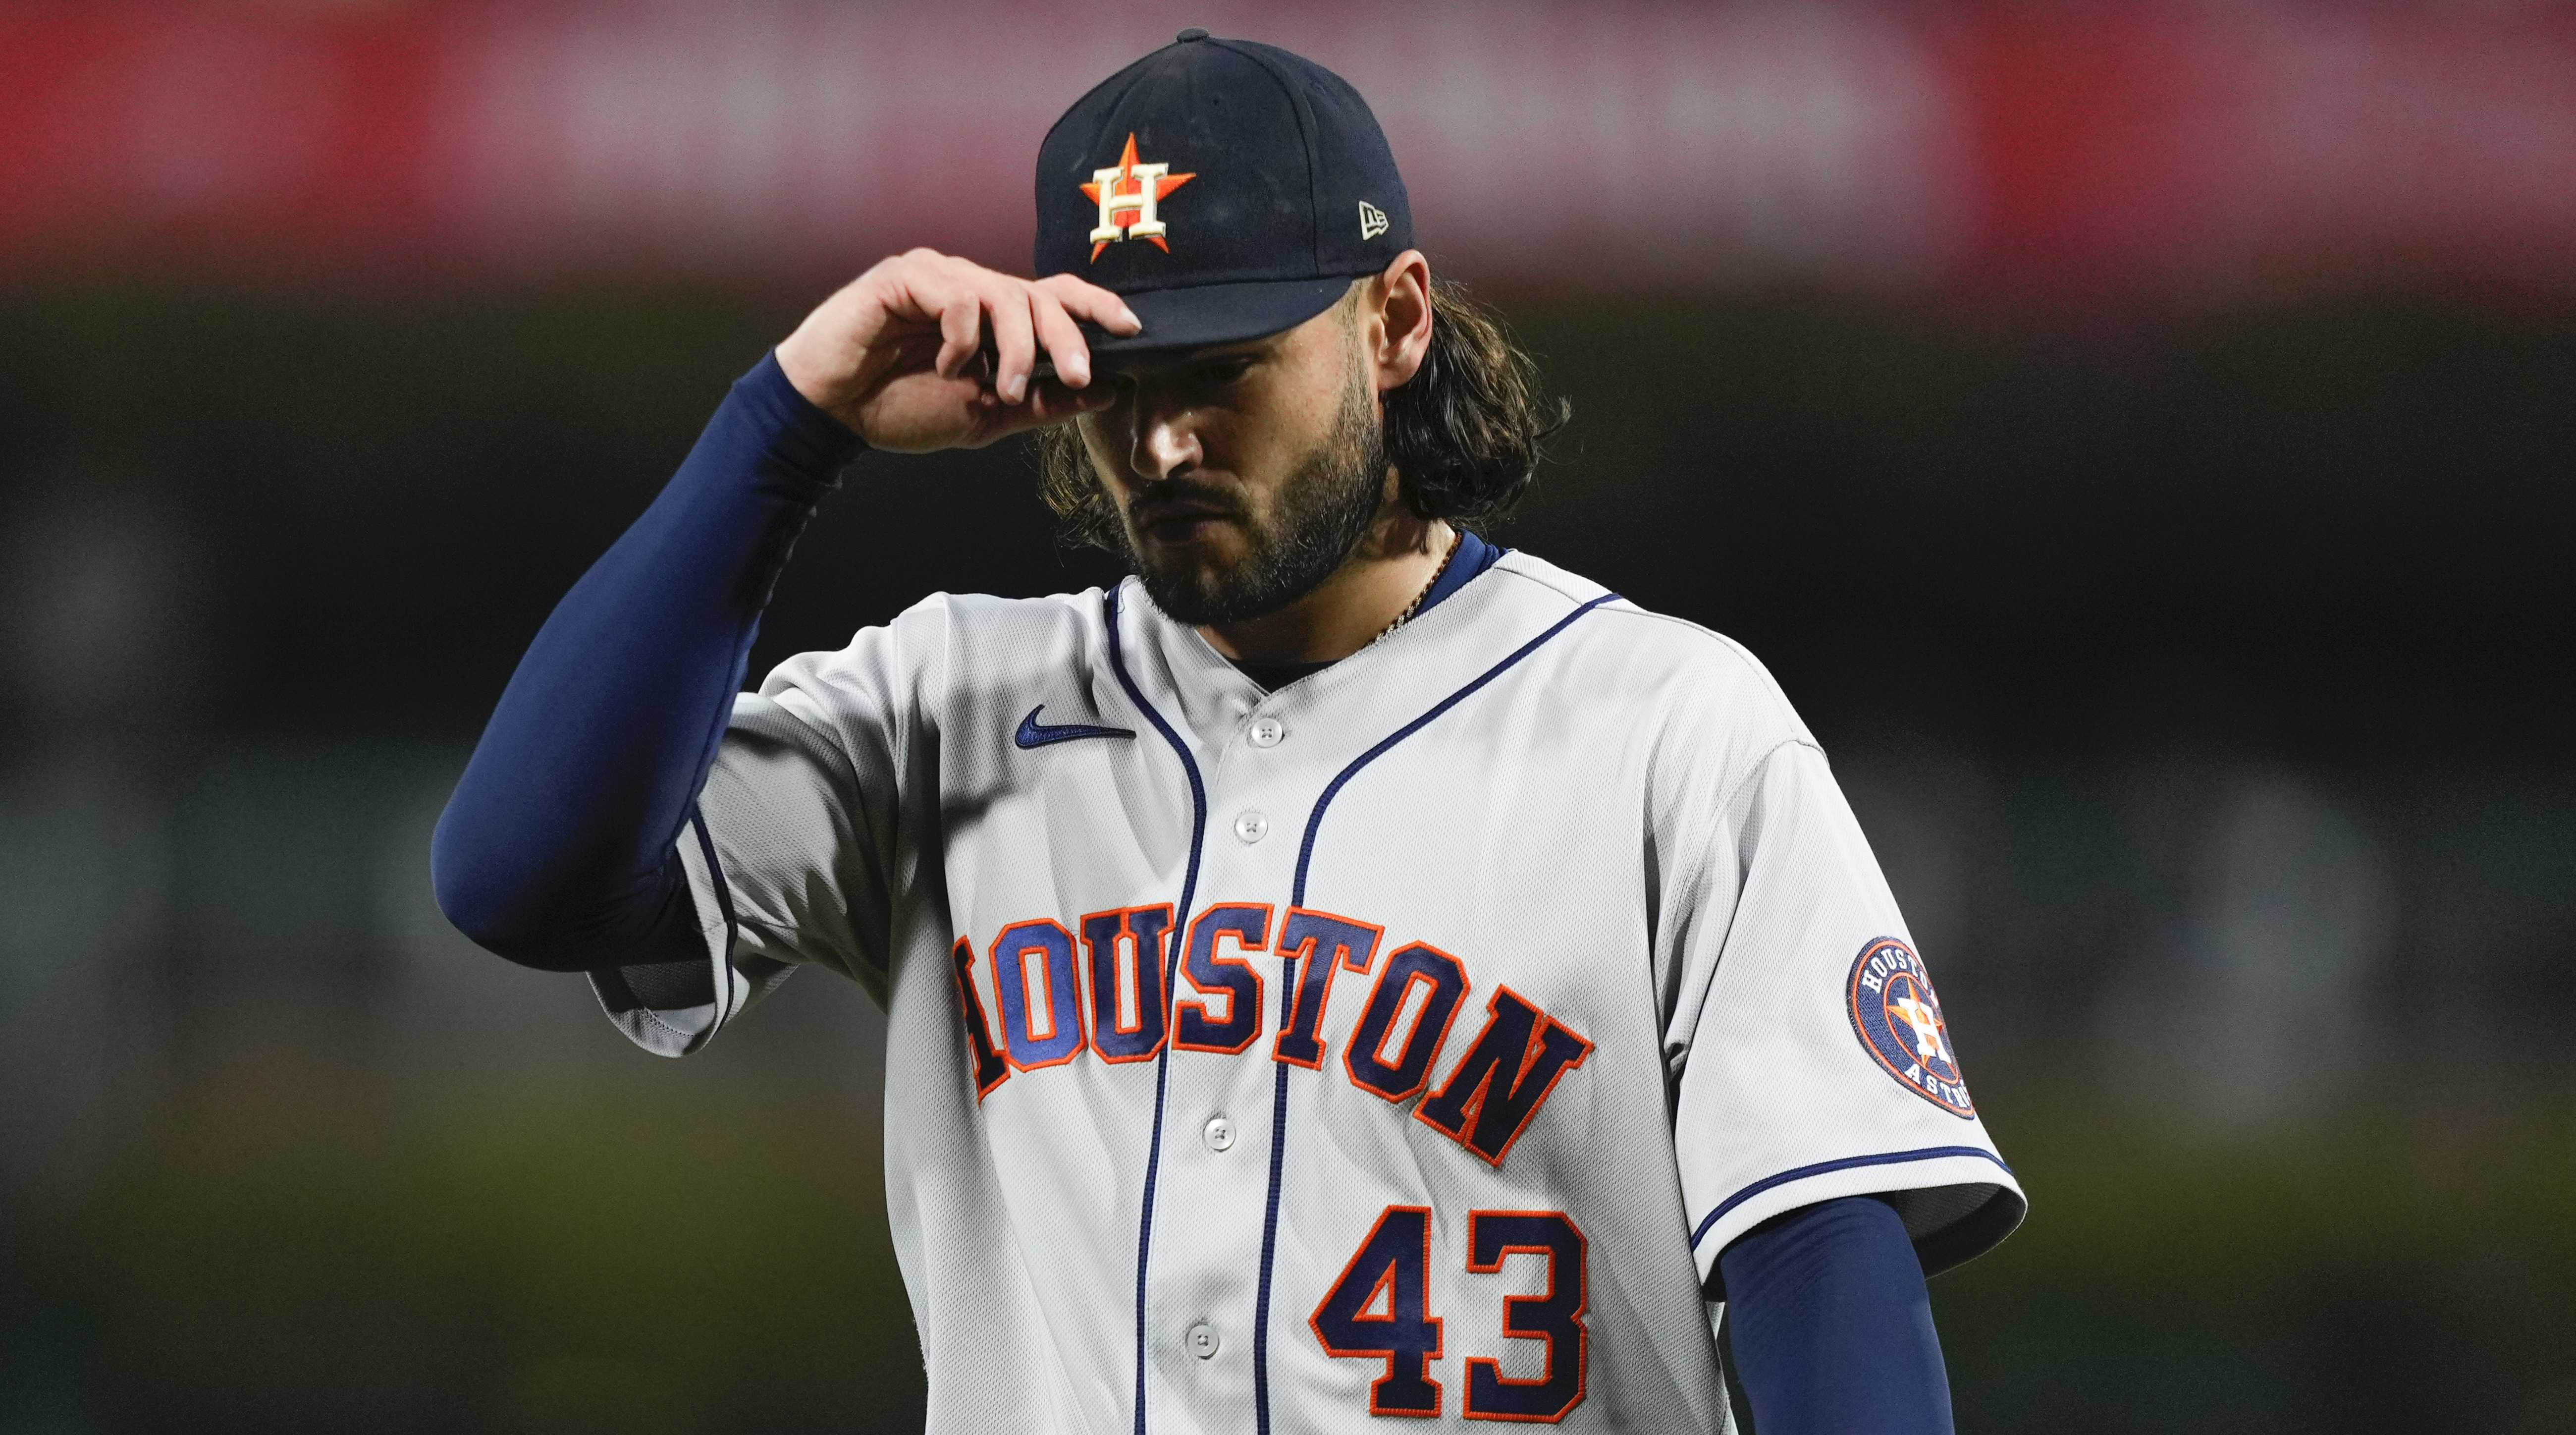 How did Lance McCullers tip his pitches? Baseball fans may have